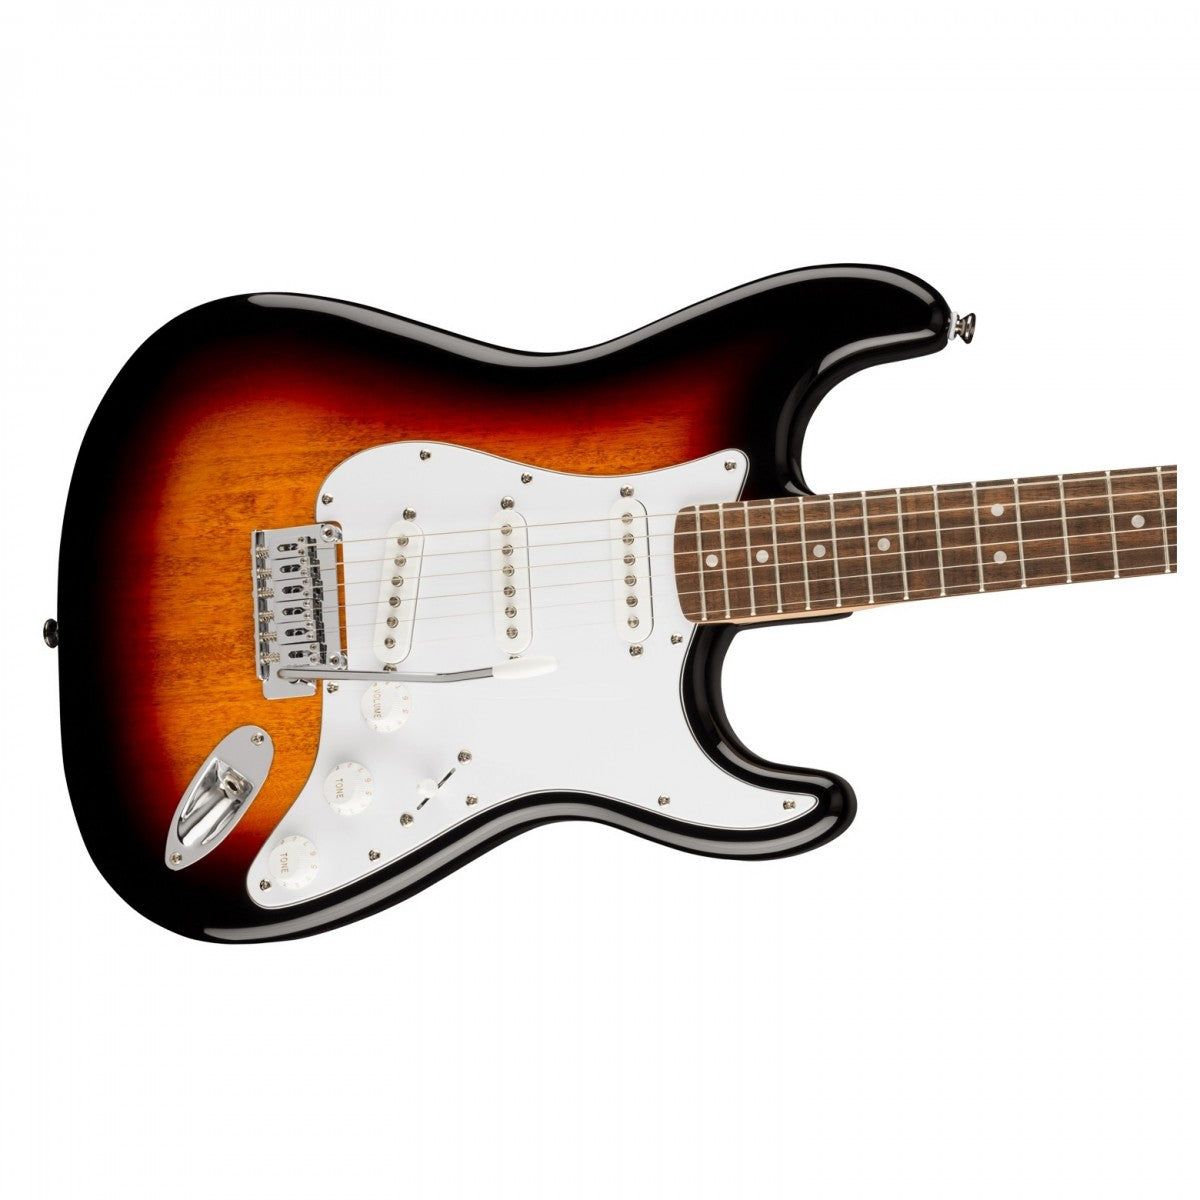 Squier Affinity Series Stratocaster, Laurel Fingerboard - Việt Music